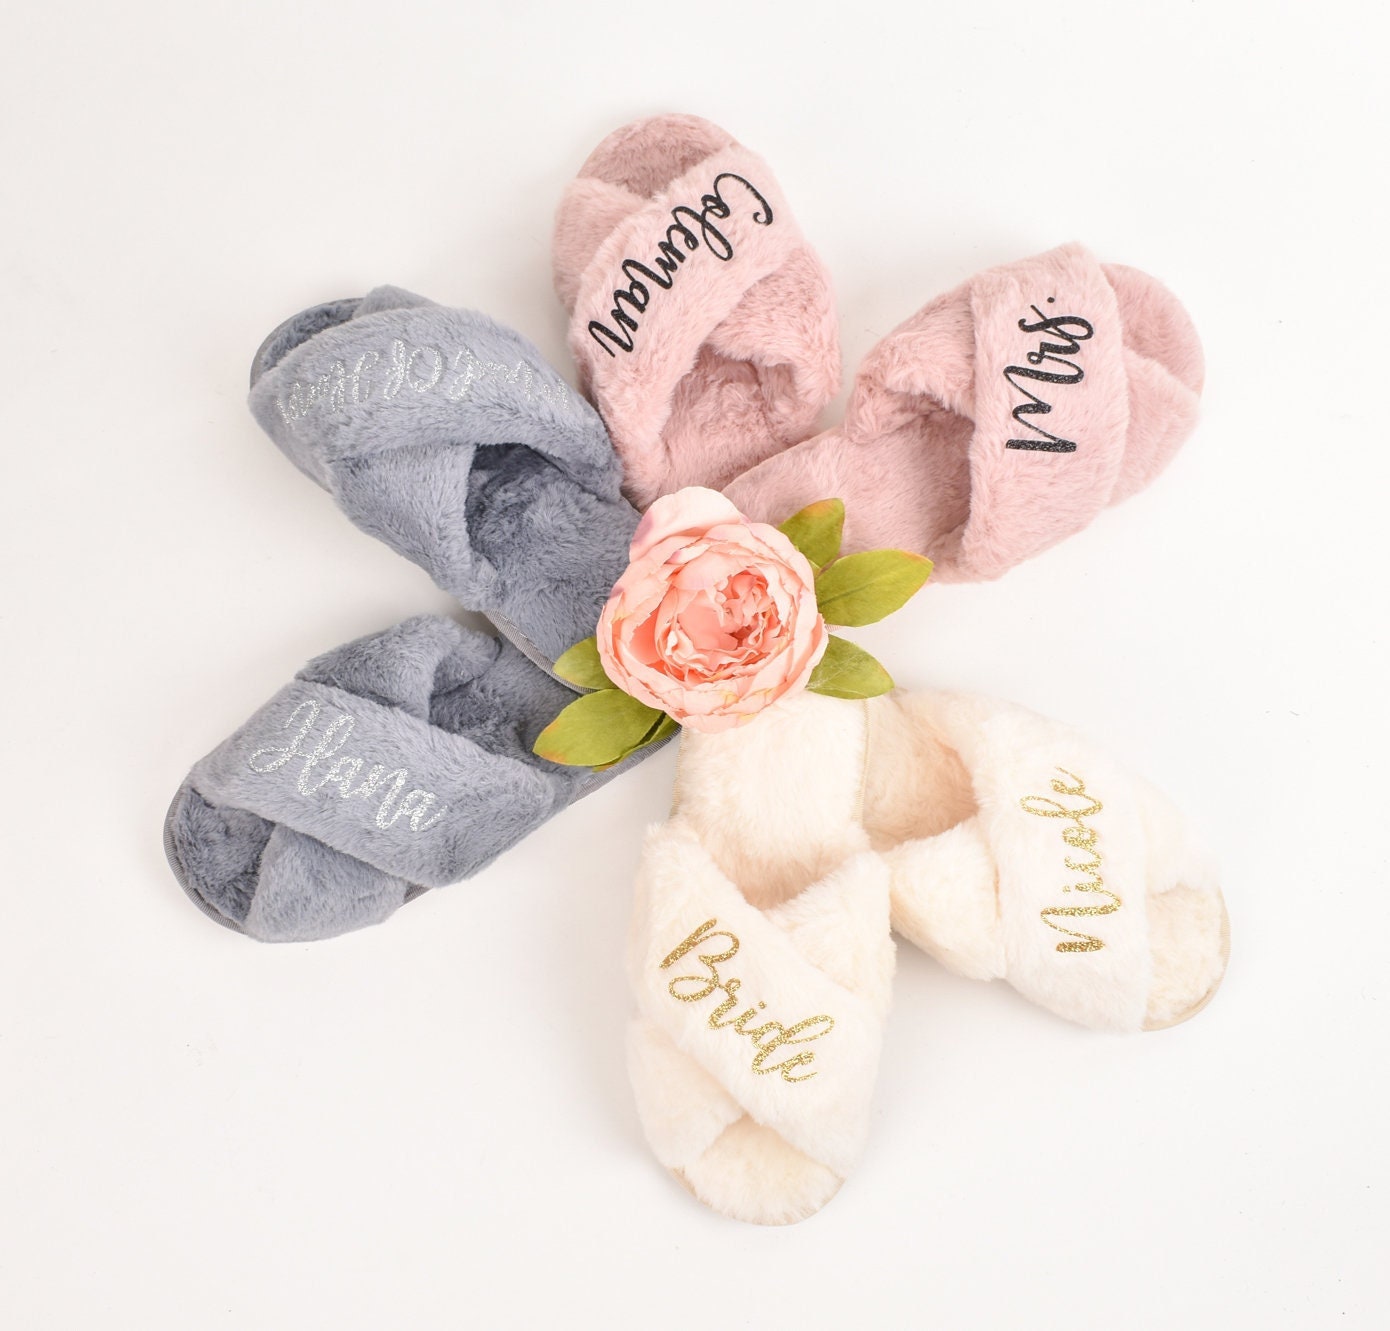 Mrs Bride Slippers for Wedding Bridal Slippers Custom Gift for Bride to Be Personalized Wedding Gift for Bride Honeymoon Gift Fluffy Slipper